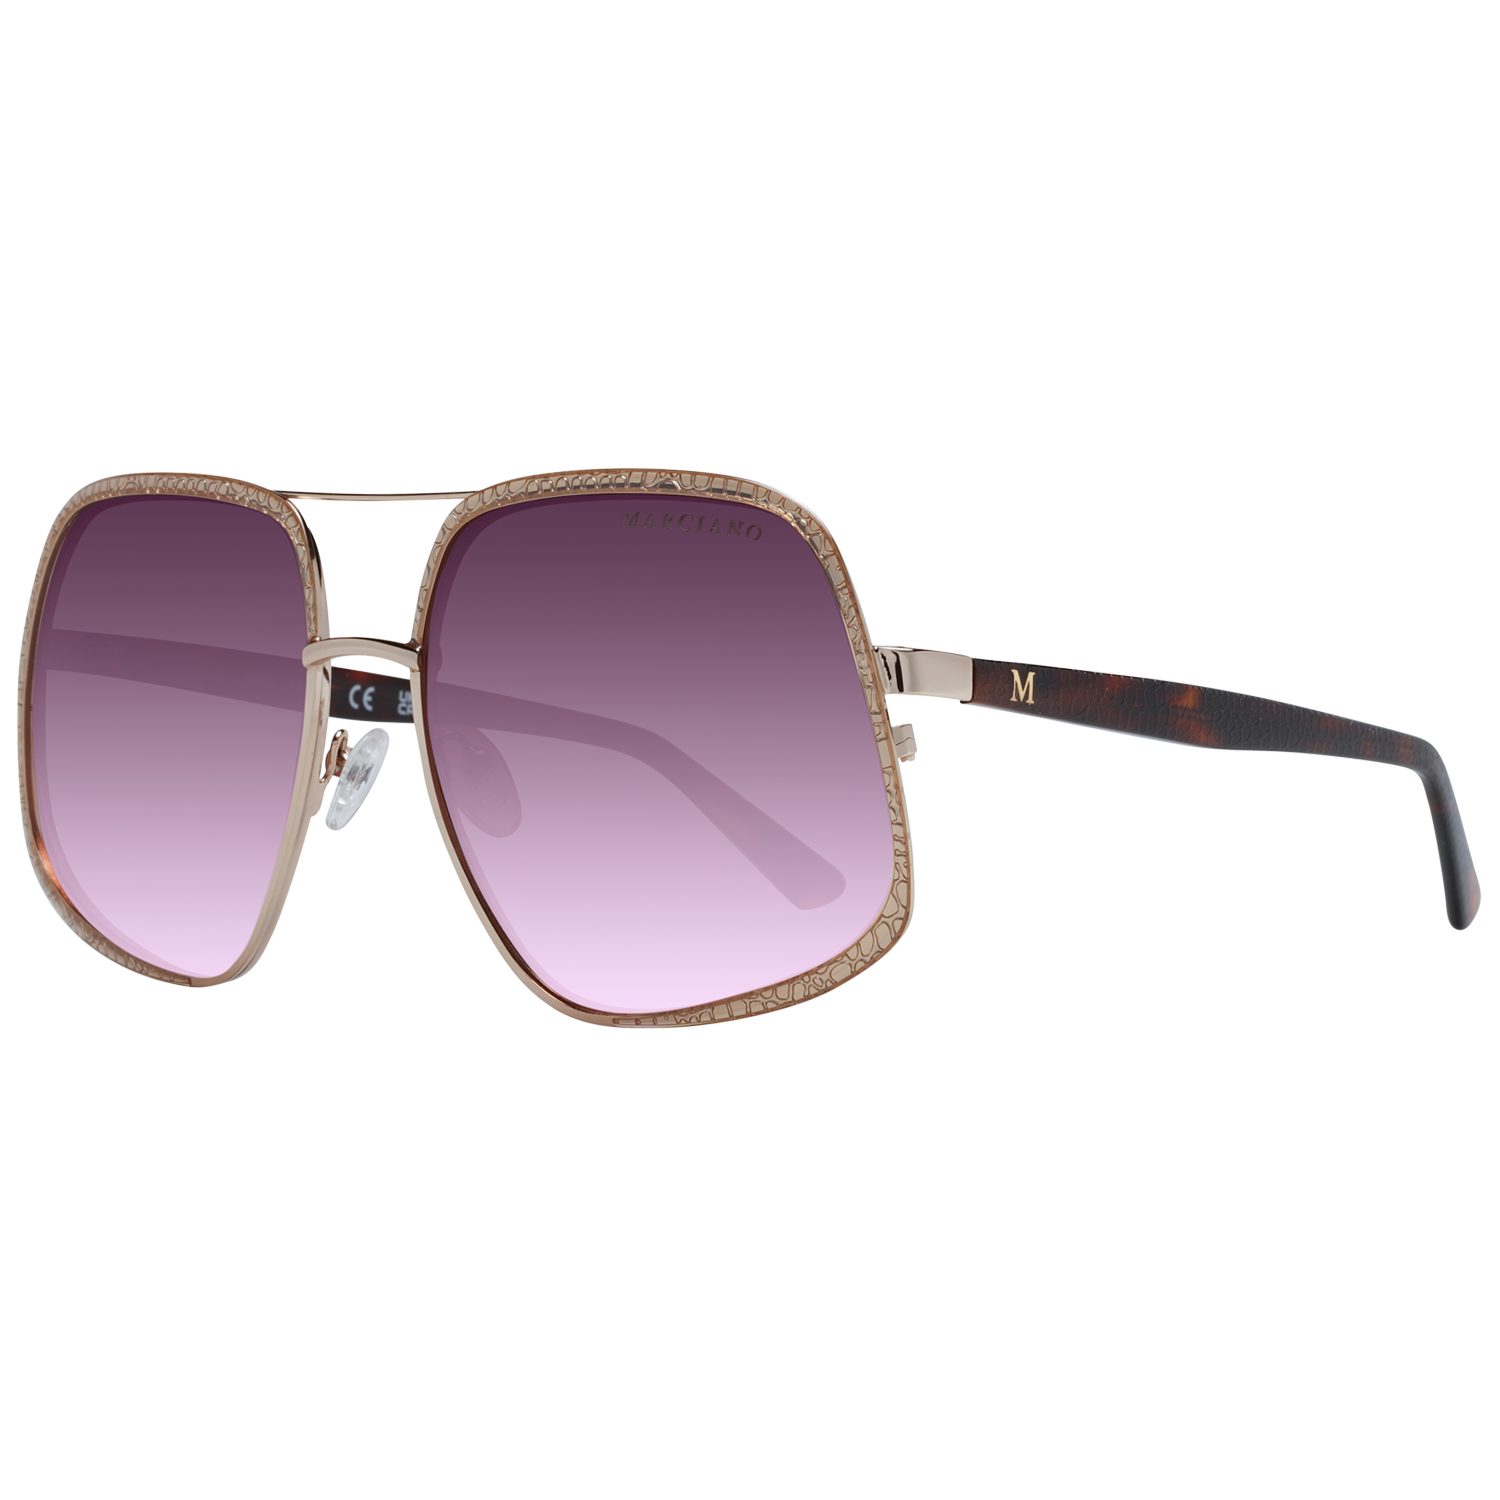 Guess by Marciano Sonnenbrille GM0826 6032T